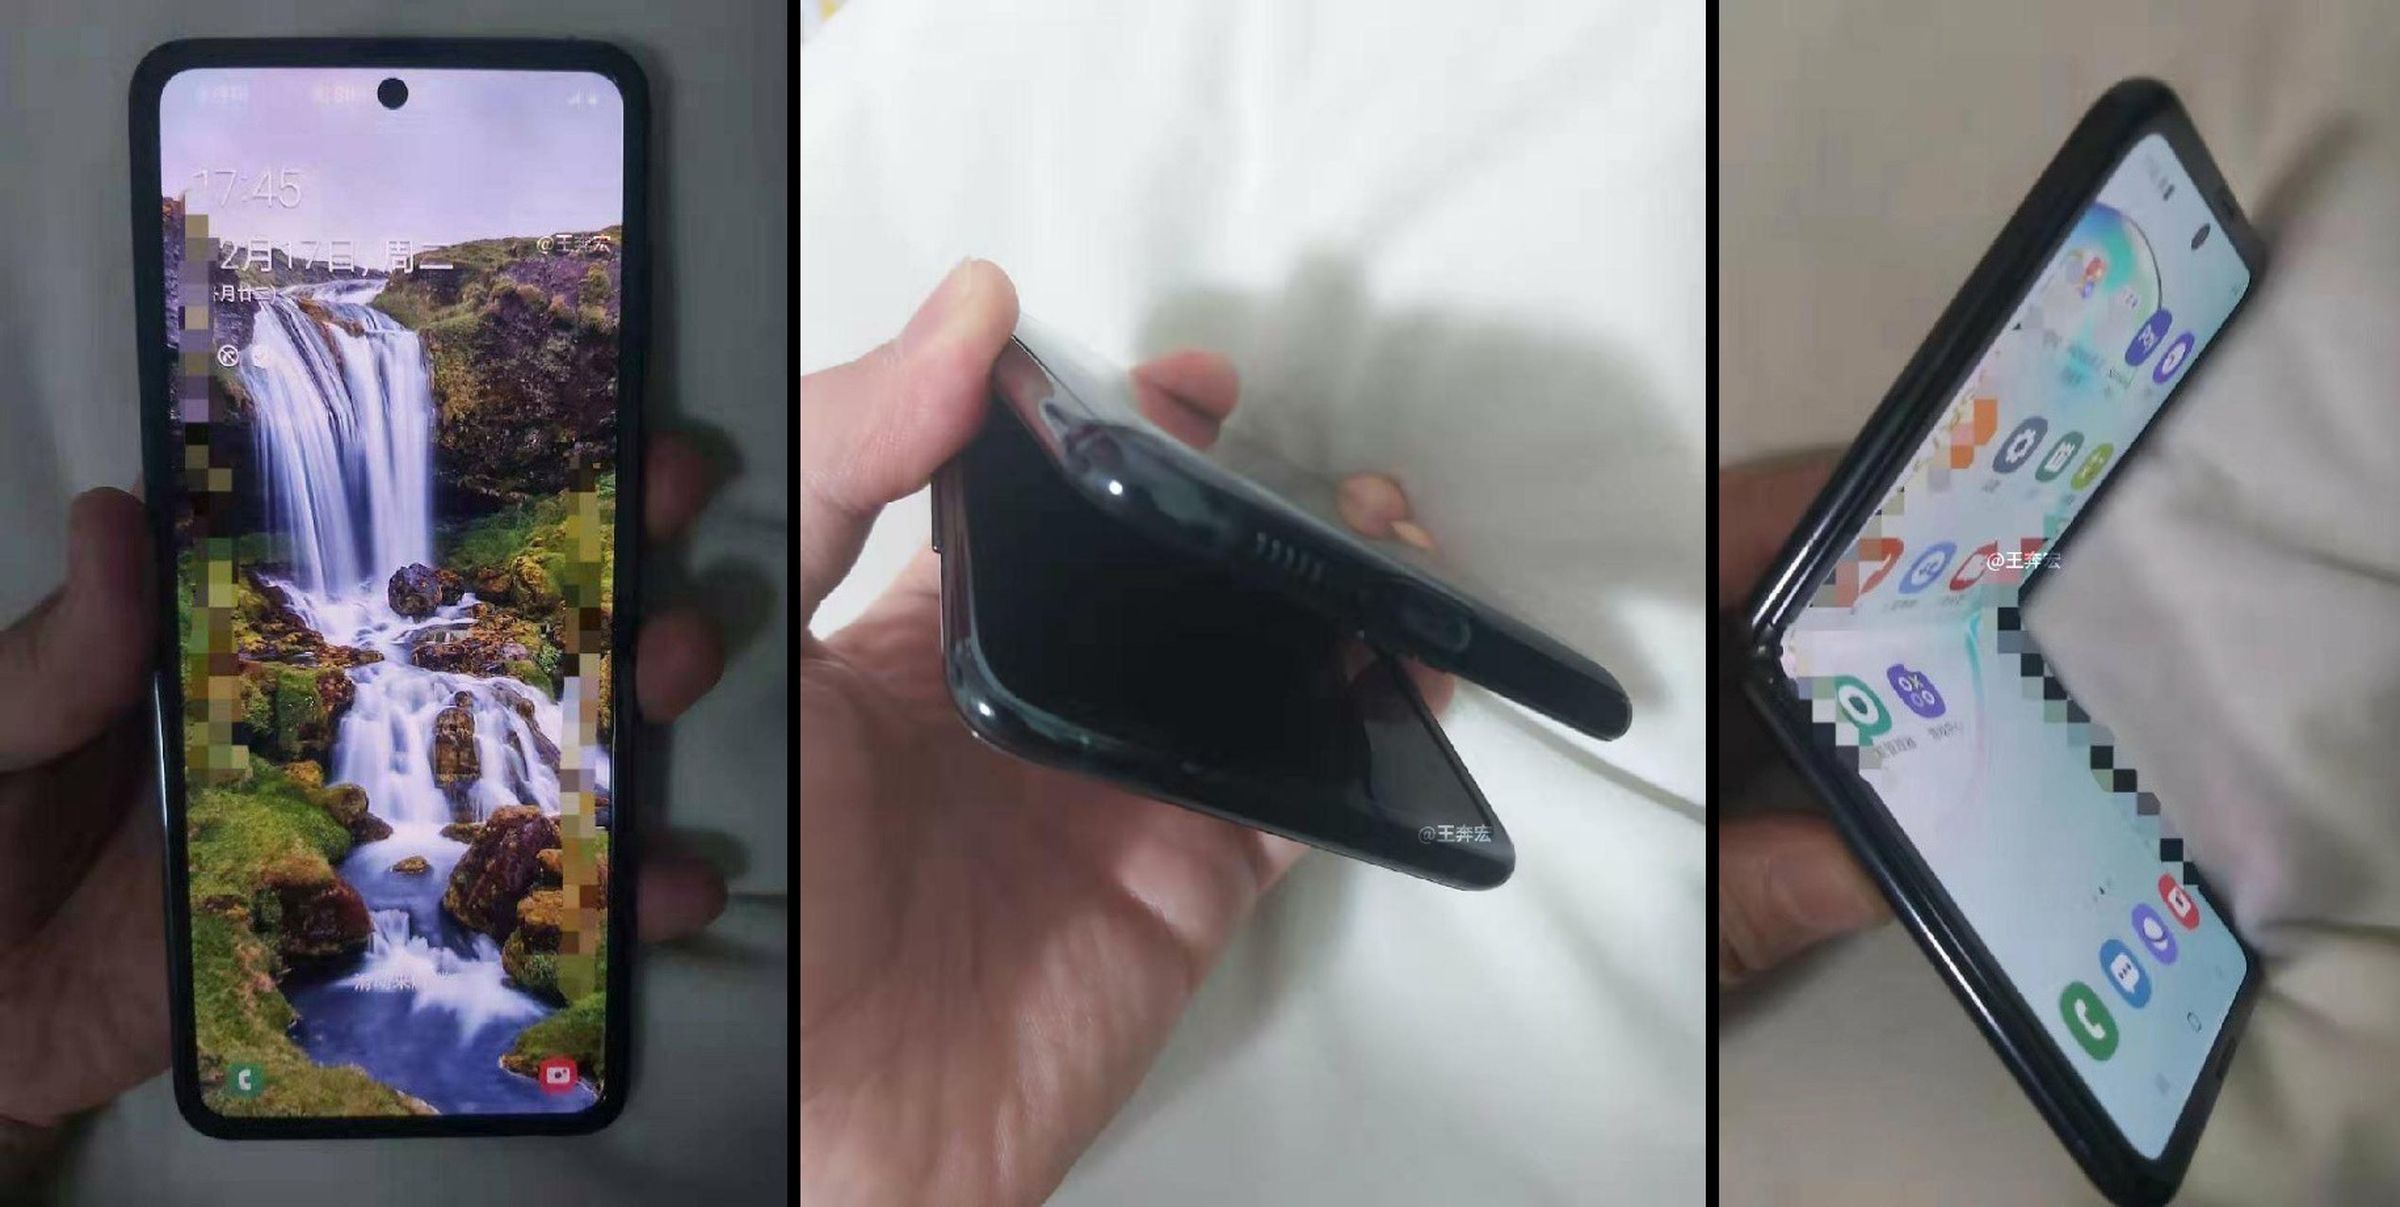 The purported leak from Ajunews matches earlier pictures supposedly showing Samsung’s “Fold 2.”